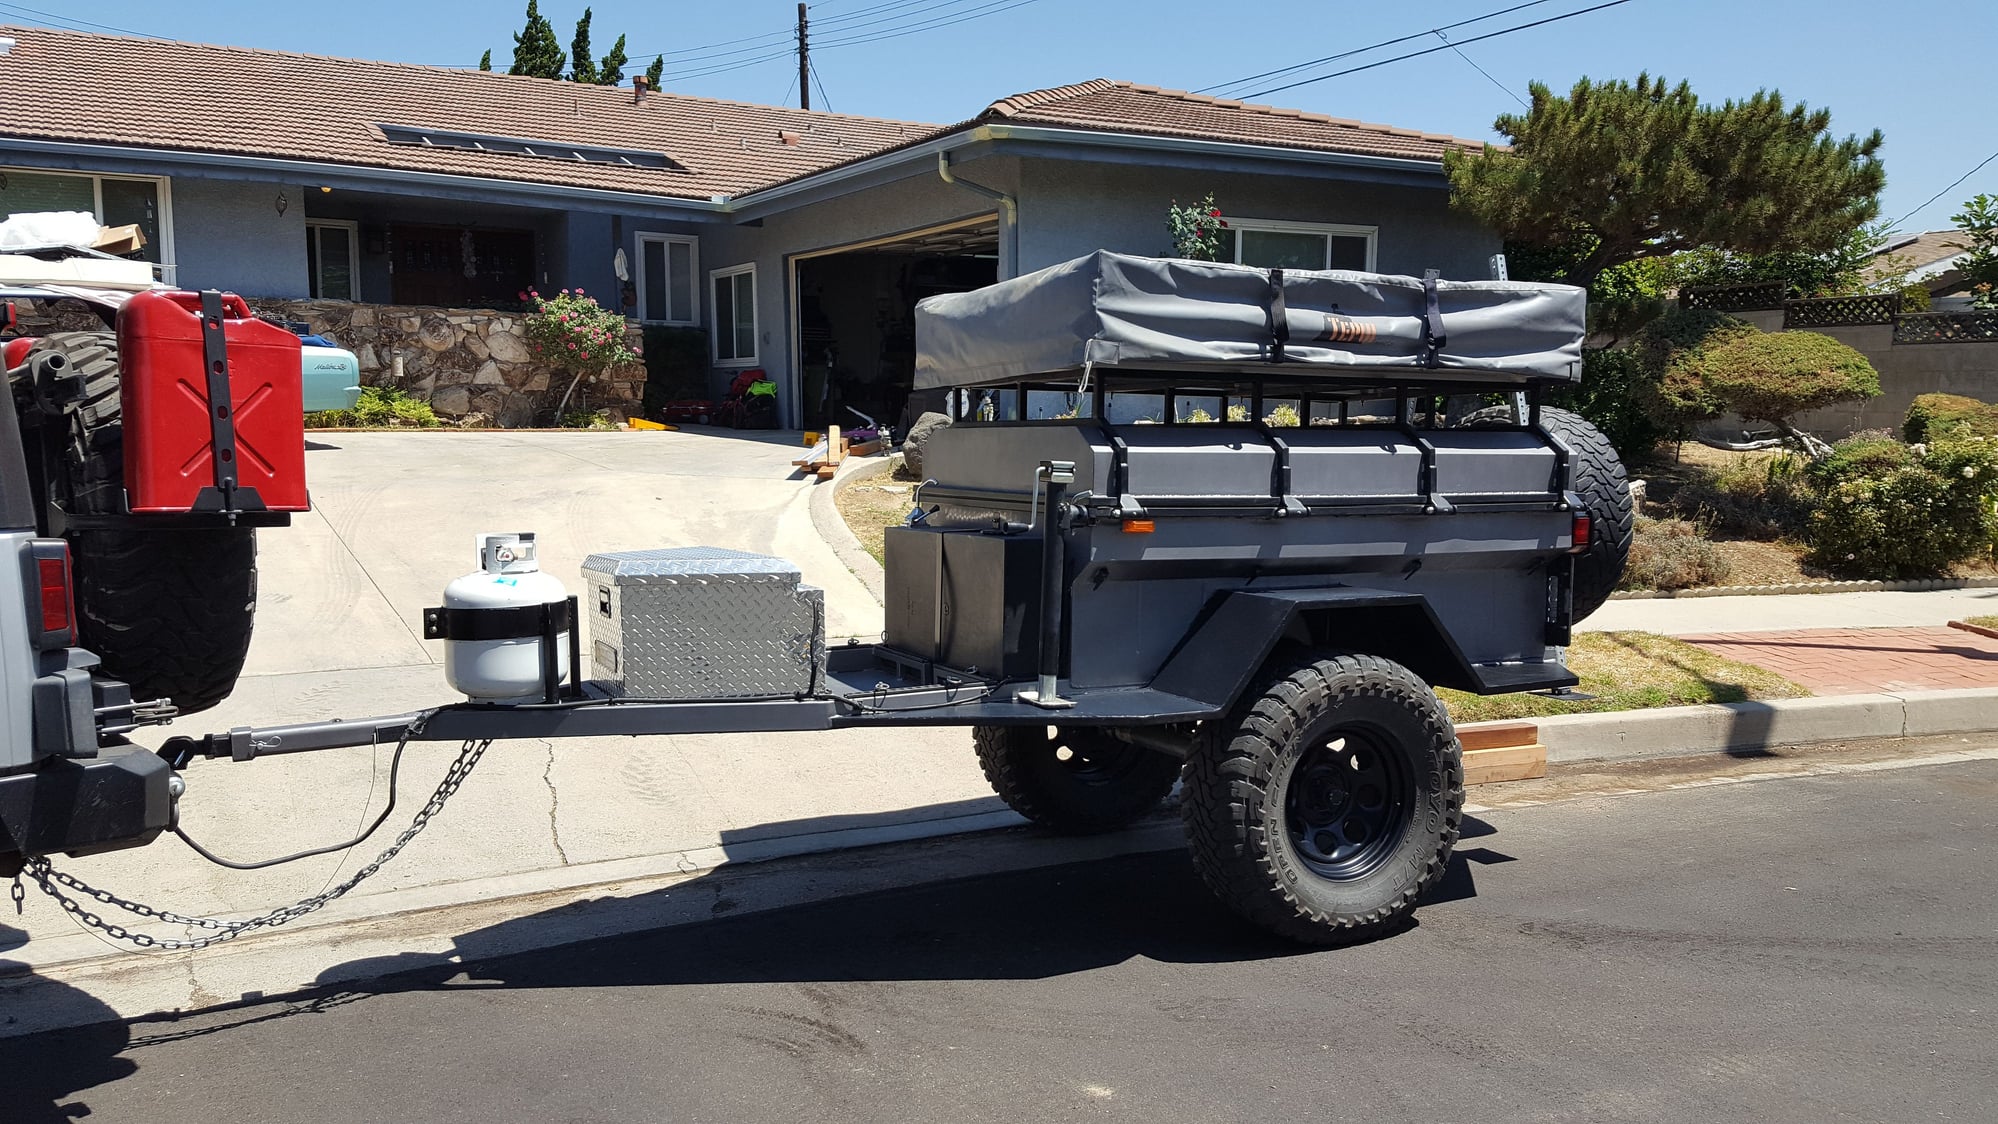 Miscellaneous - Expedition Trailer on 35" Tires - Used - North Hills, CA 91343, United States